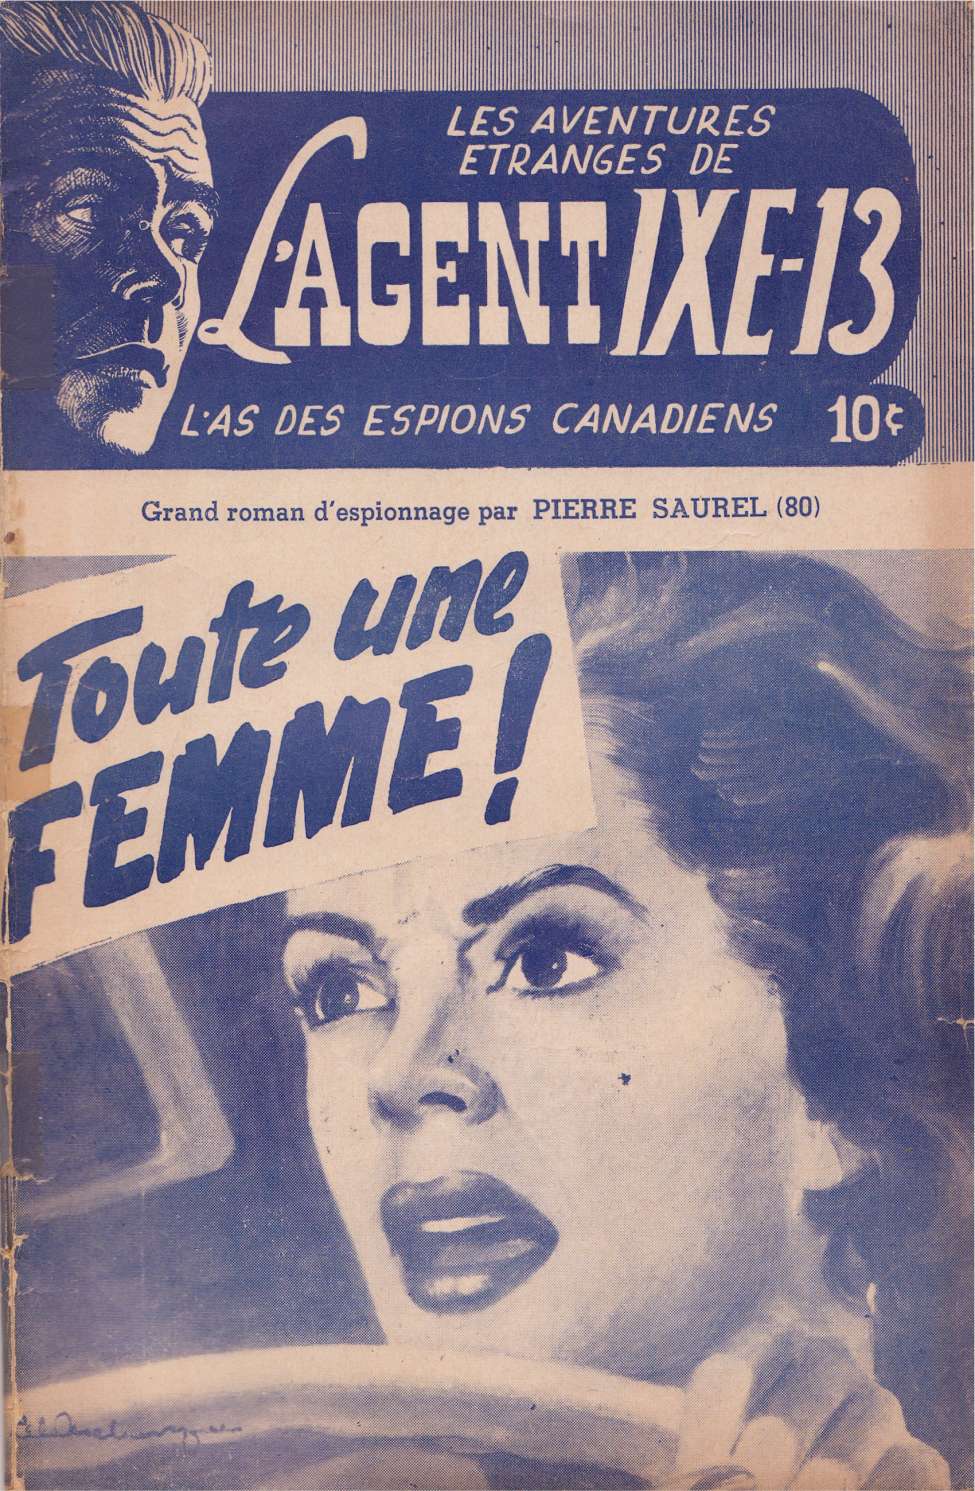 Book Cover For L'Agent IXE-13 v2 80 - Toute une femme!